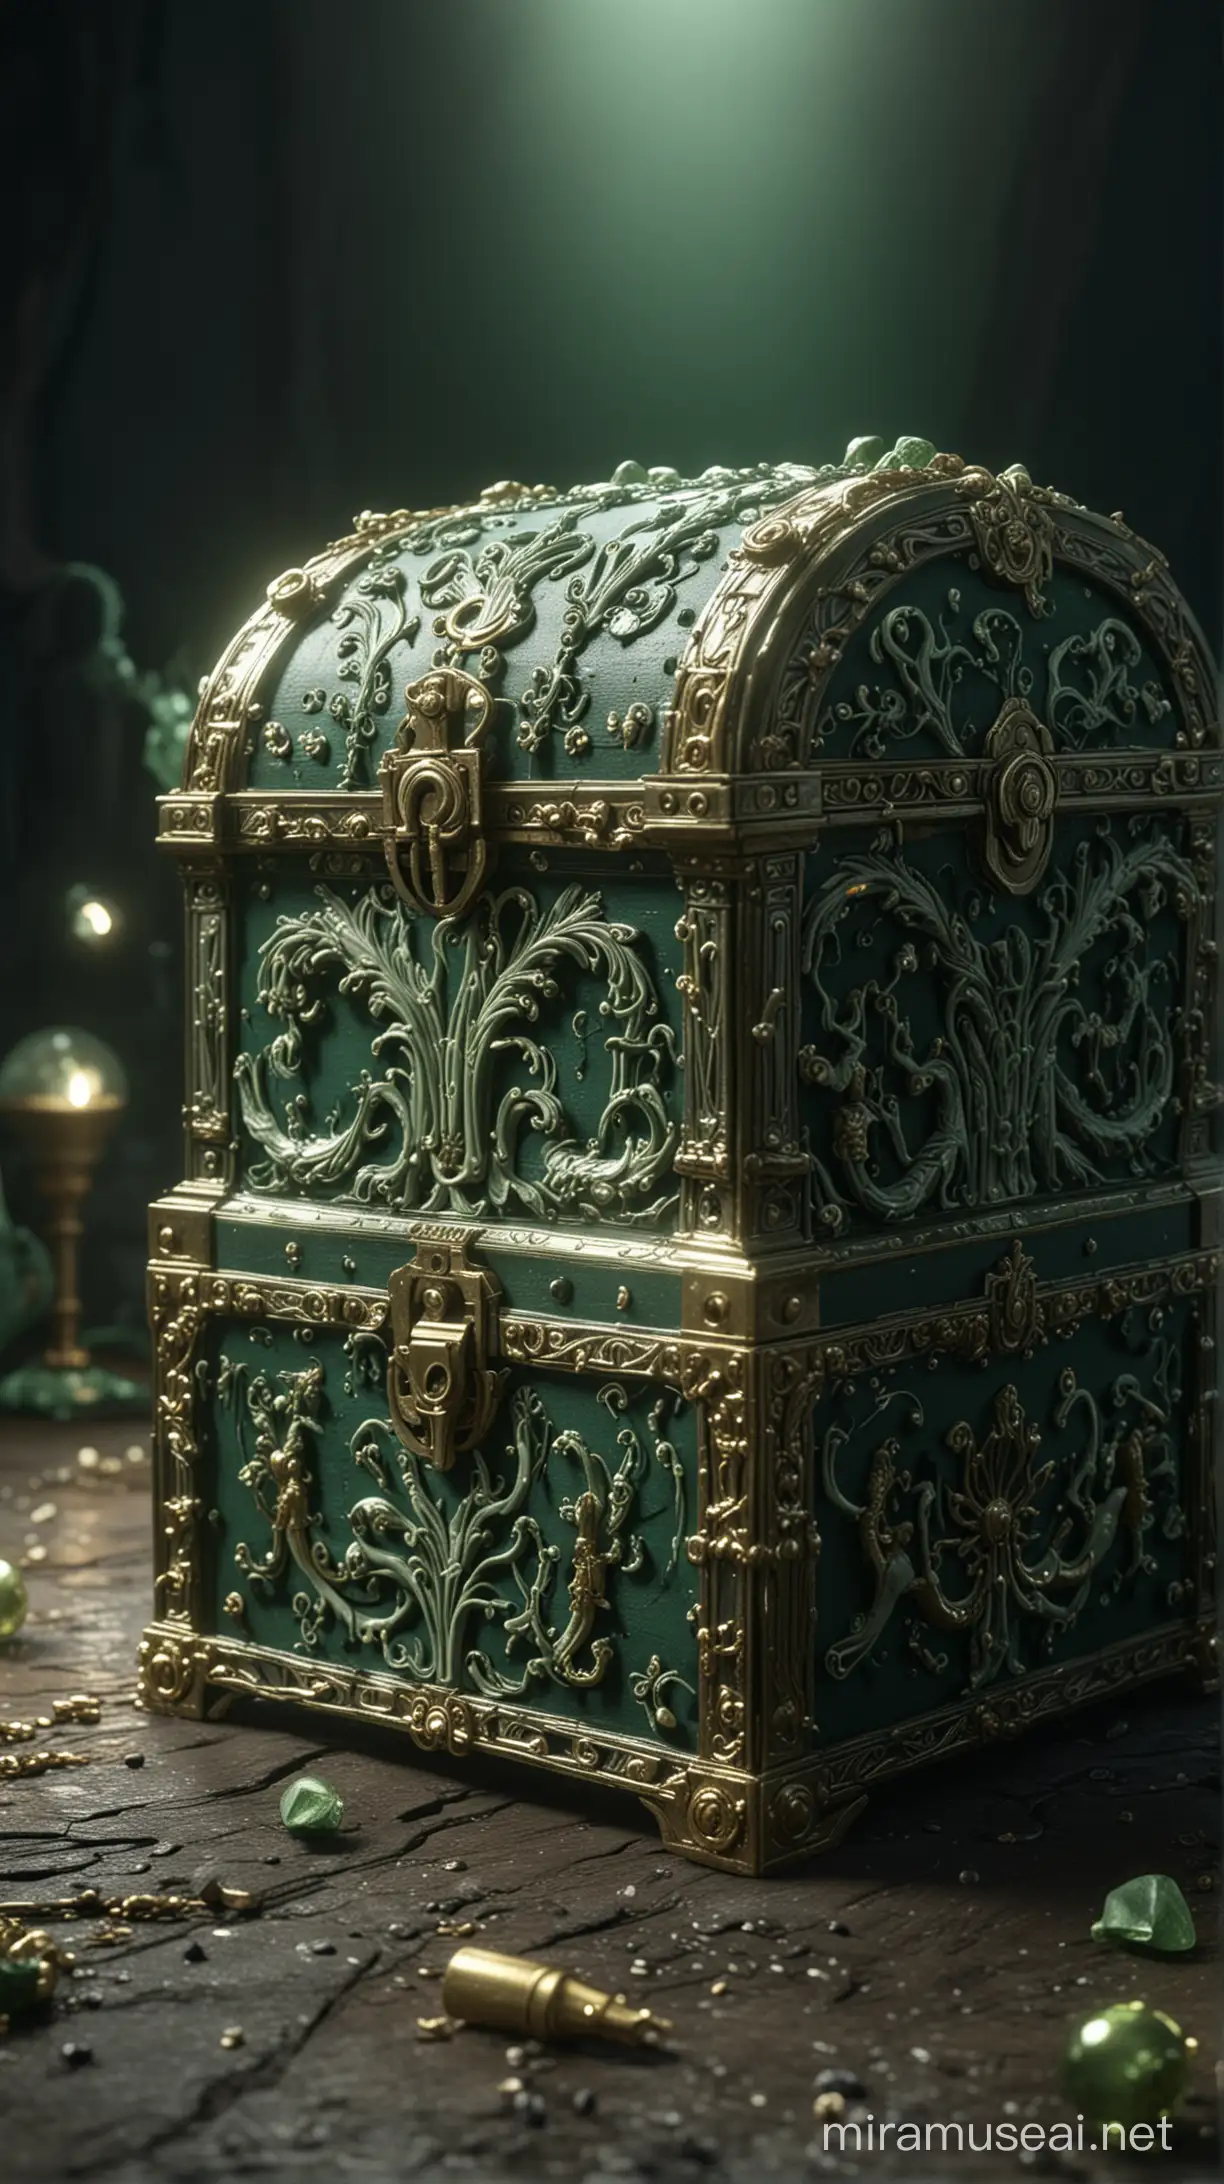 Glowing Green Art Deco Treasure Chest with Tentacles and Fog